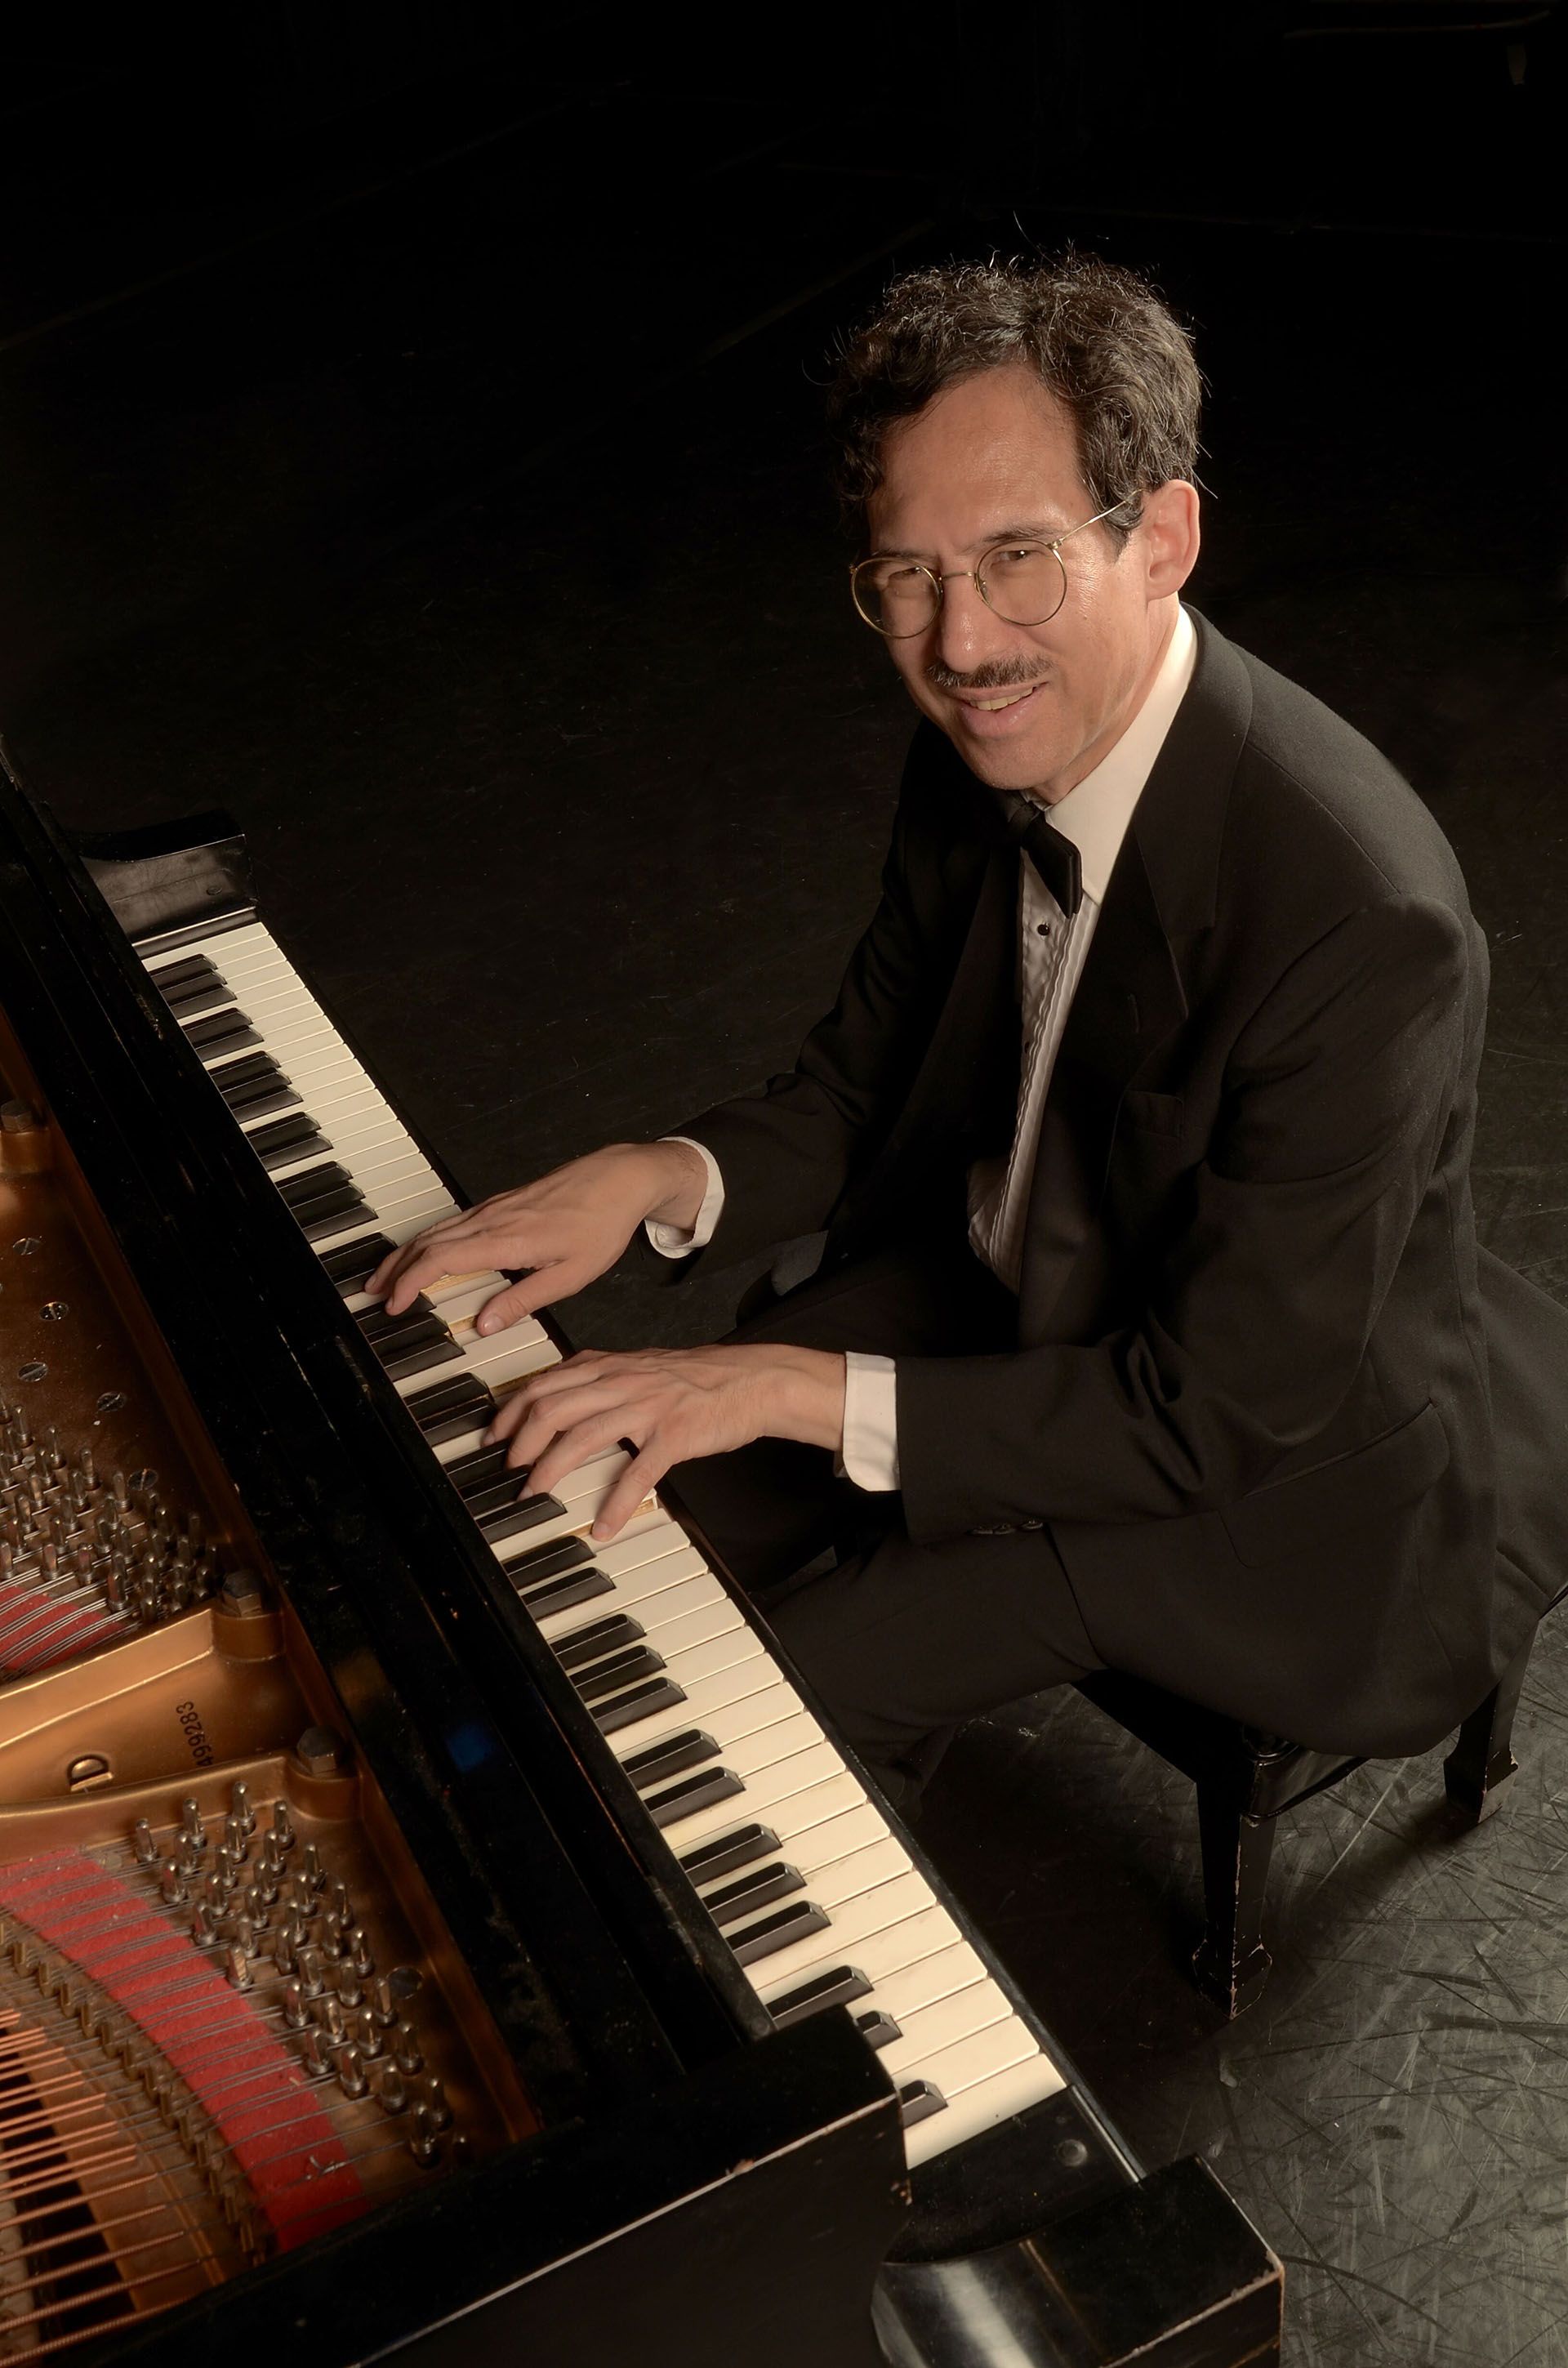 A photo of pianist Michael Arnowitt playing piano while wearing a suit. 